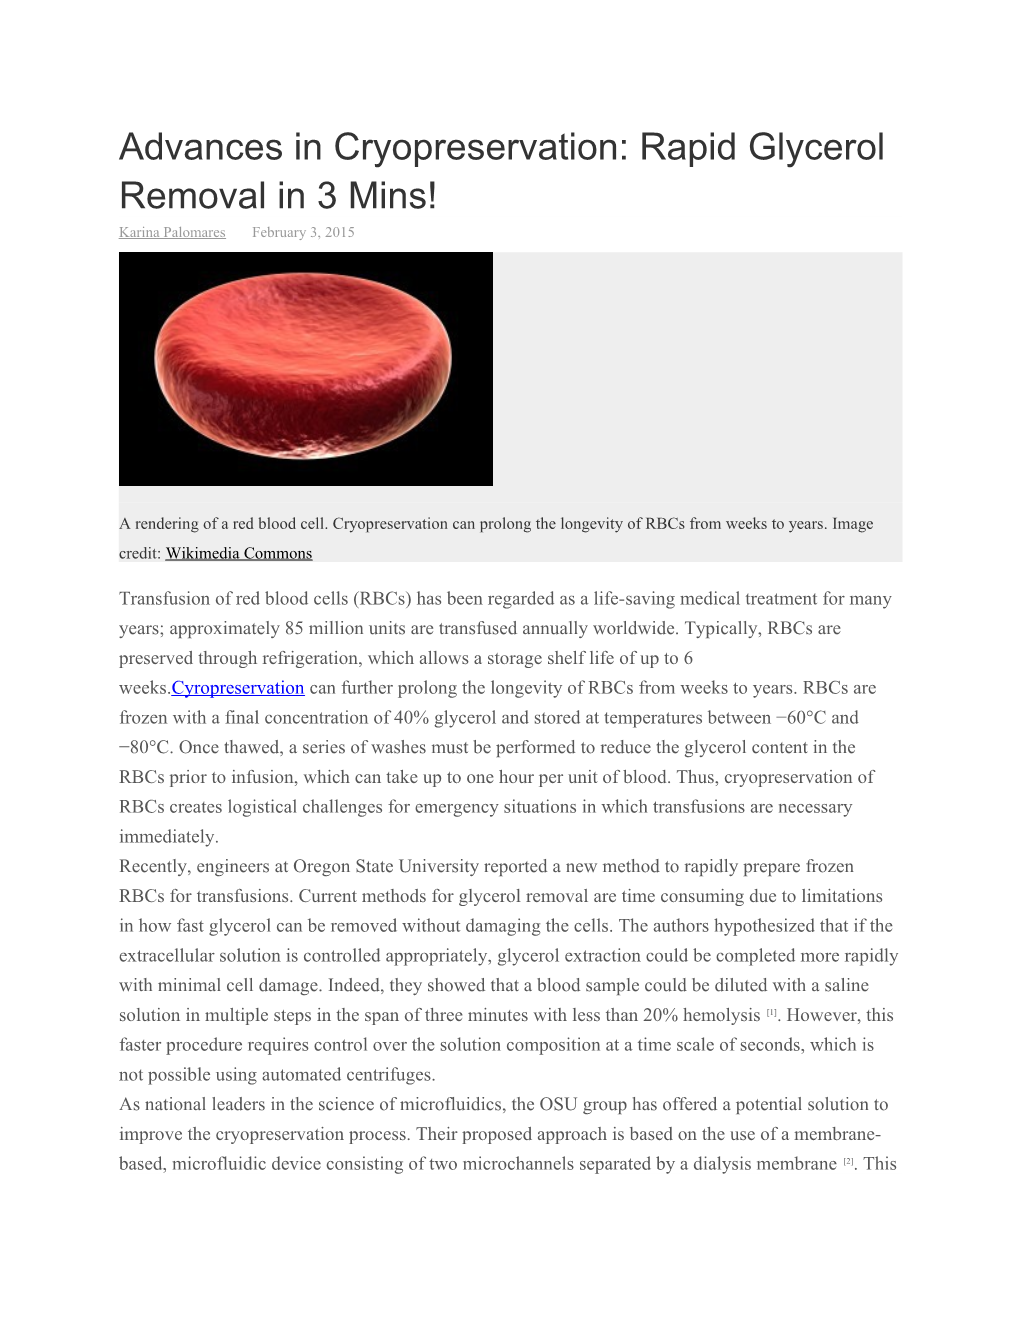 Advances in Cryopreservation: Rapid Glycerol Removal in 3 Mins!